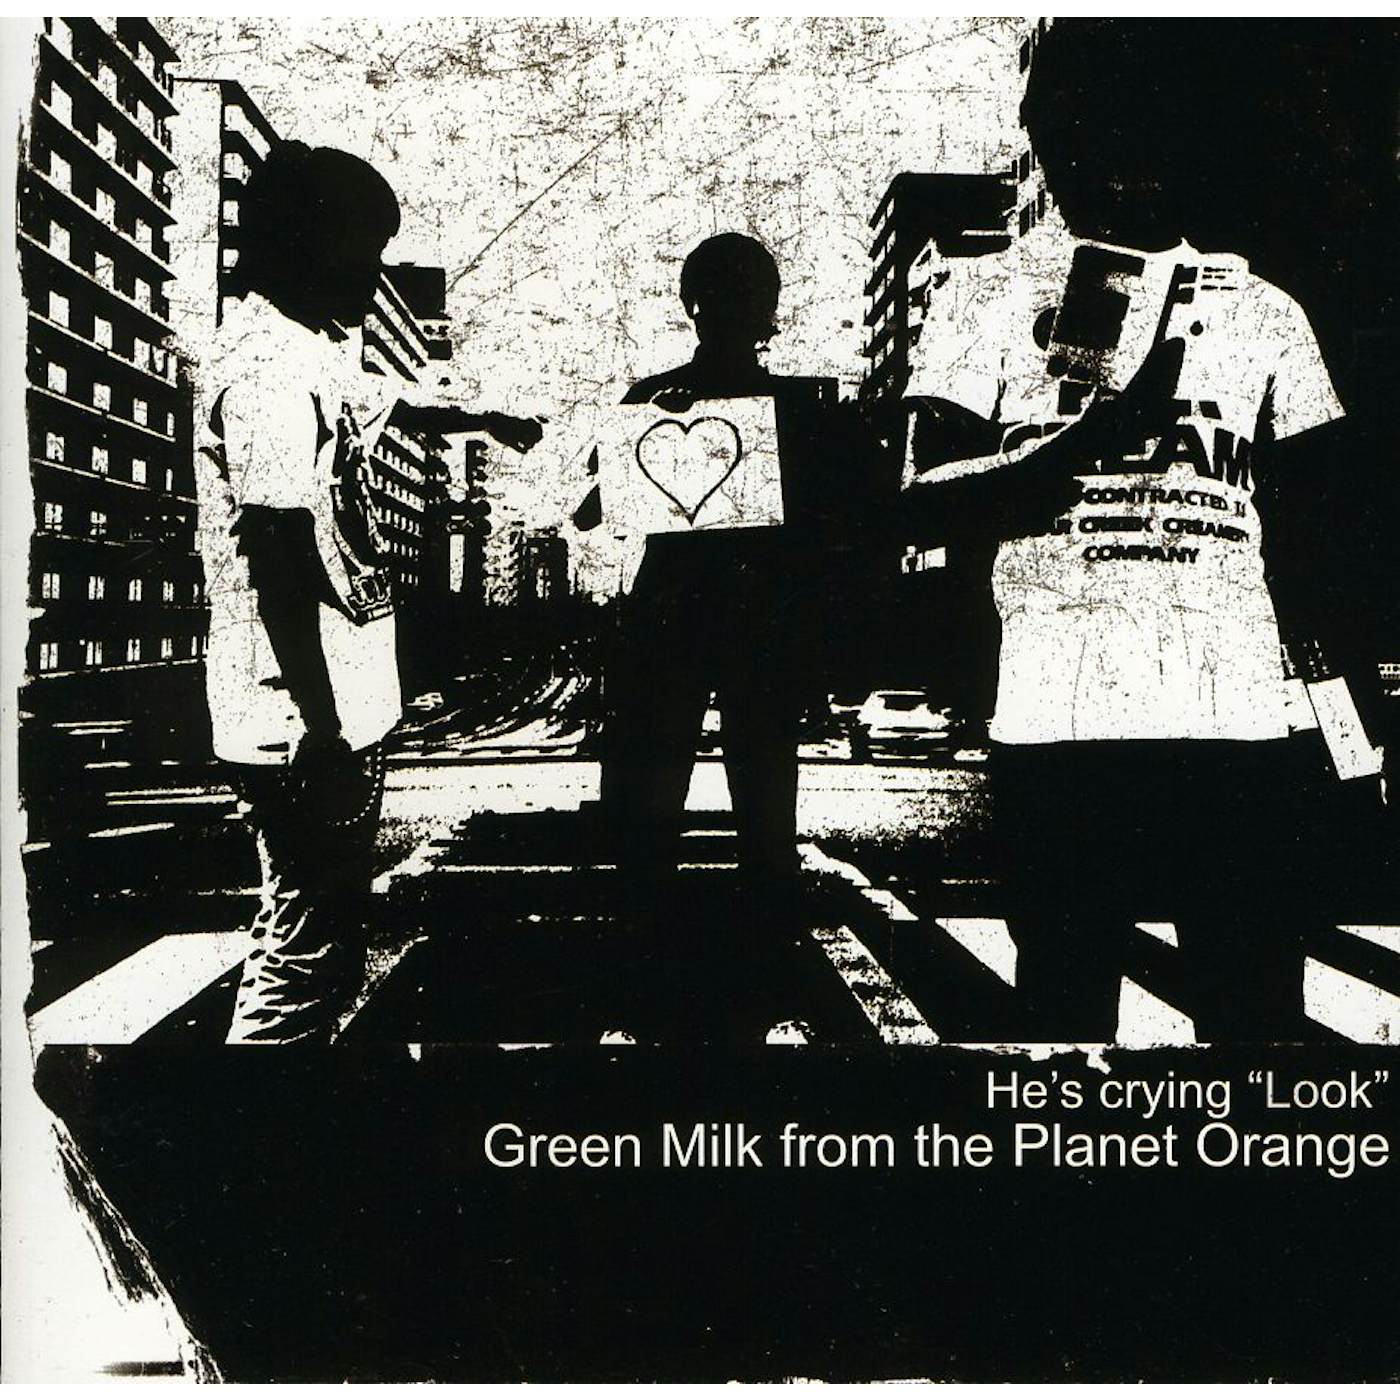 Green Milk from the Planet Orange HE'S CRYING LOOK CD